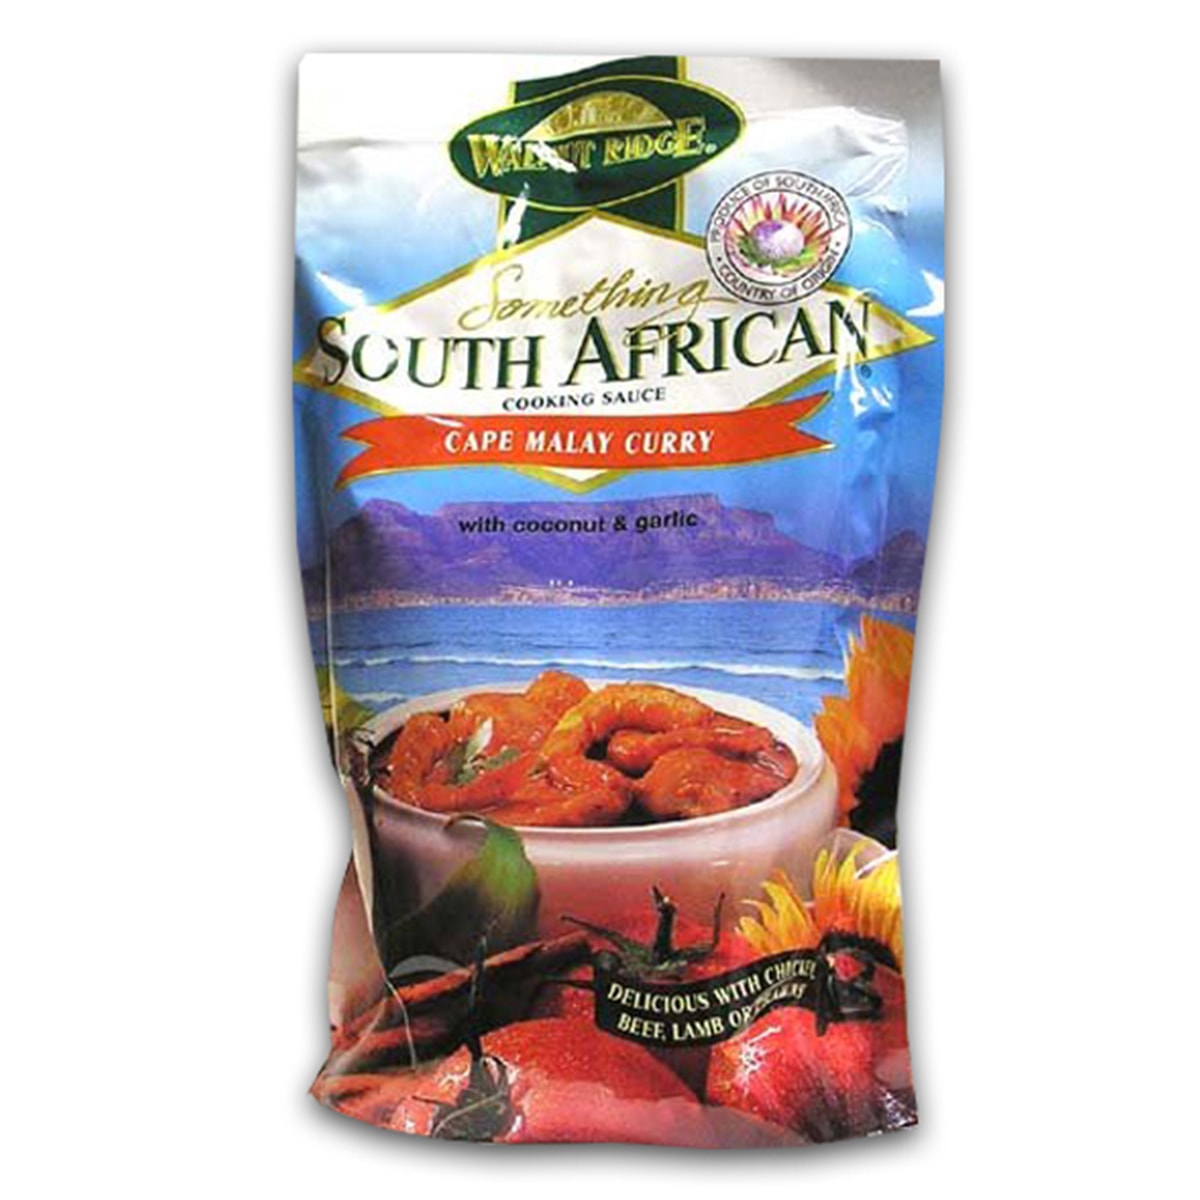 Buy Something South African Cape Malay Curry Cooking Sauce - 400 gm